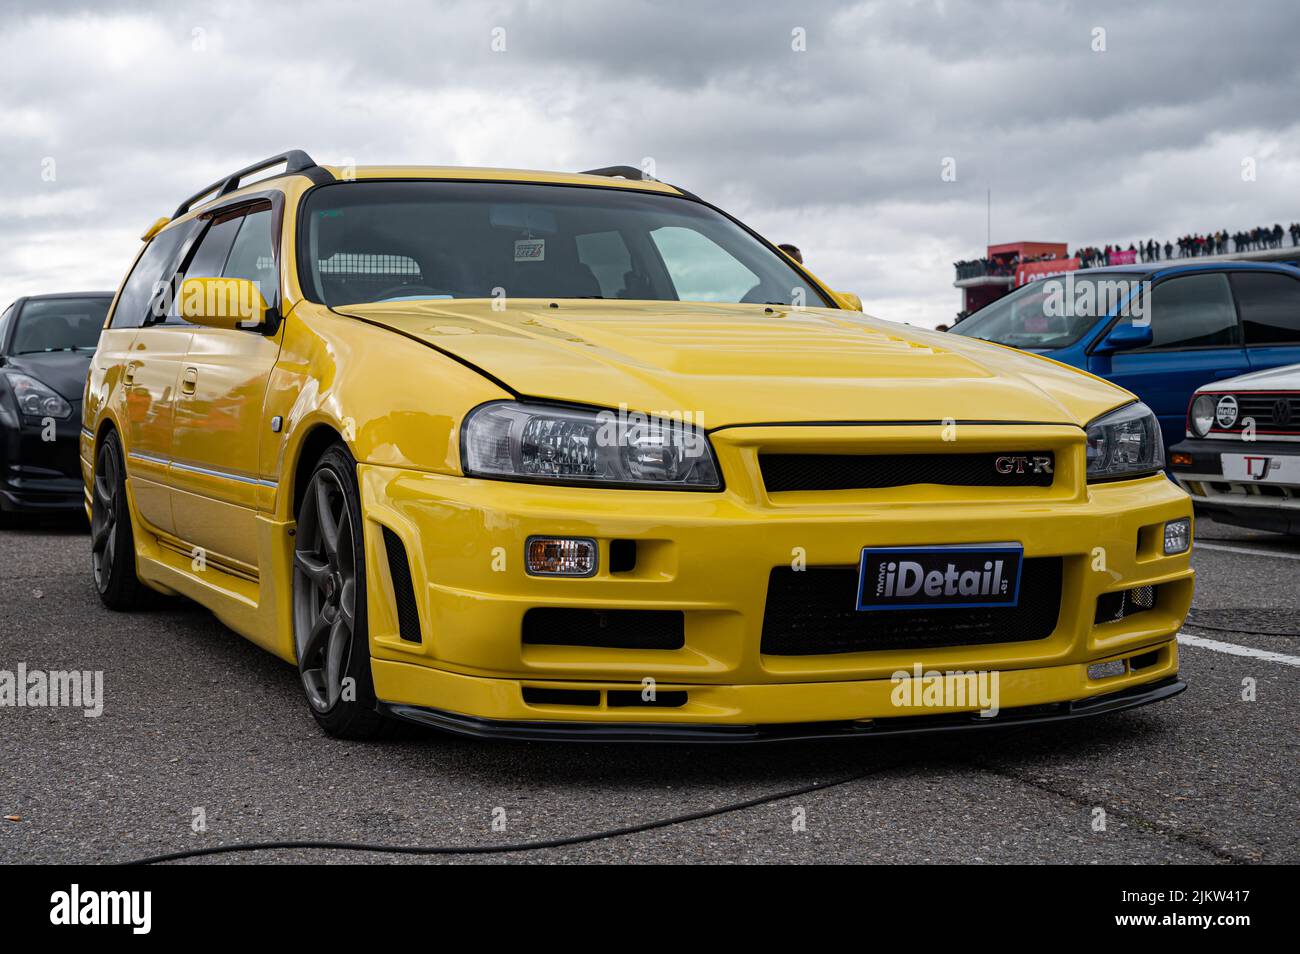 Navarre, Spain; March 6, 2022: Nice sports family car Nissan Stagea R34 GT-R Wagon in yellow color Stock Photo